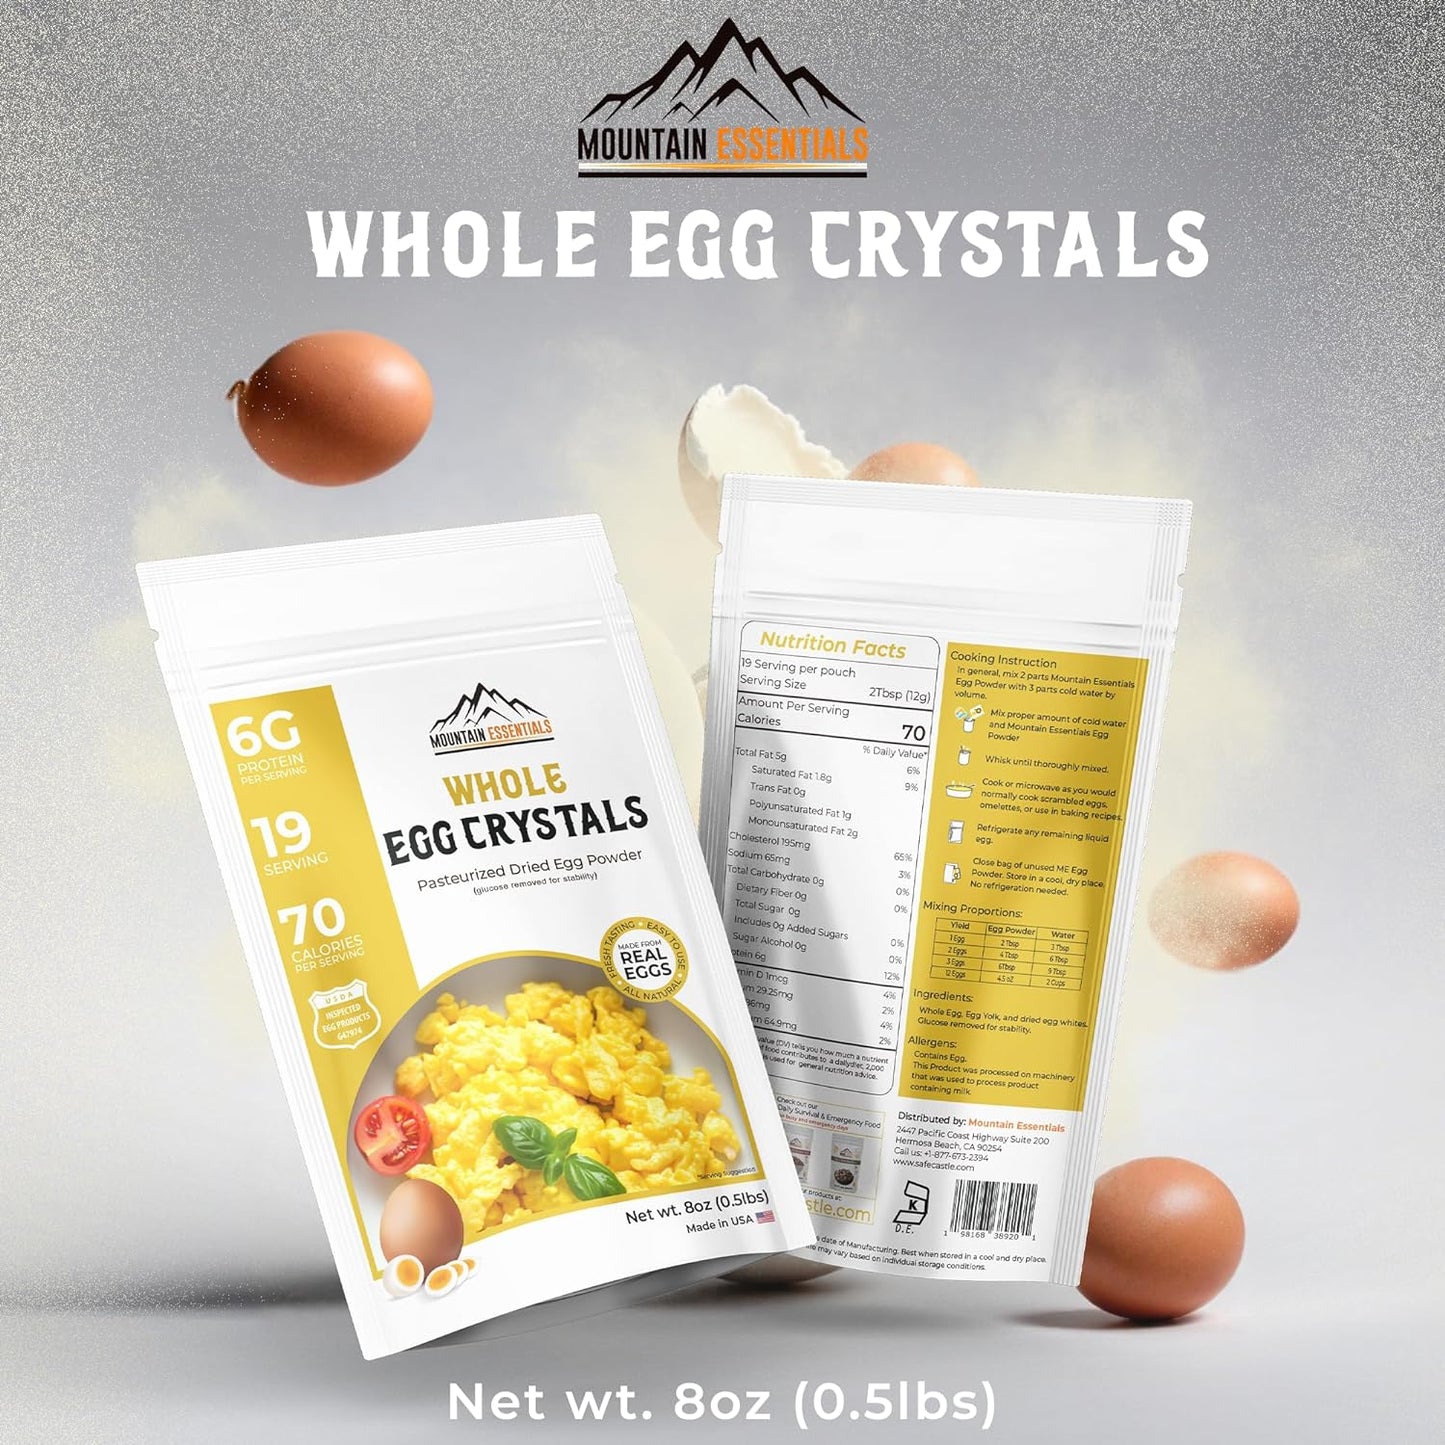 MOUNTAIN ESSENTIALS Whole Egg Crystals Pasteurized Dried Egg Powder 8 Oz Great for Breakfast and Camping Meals